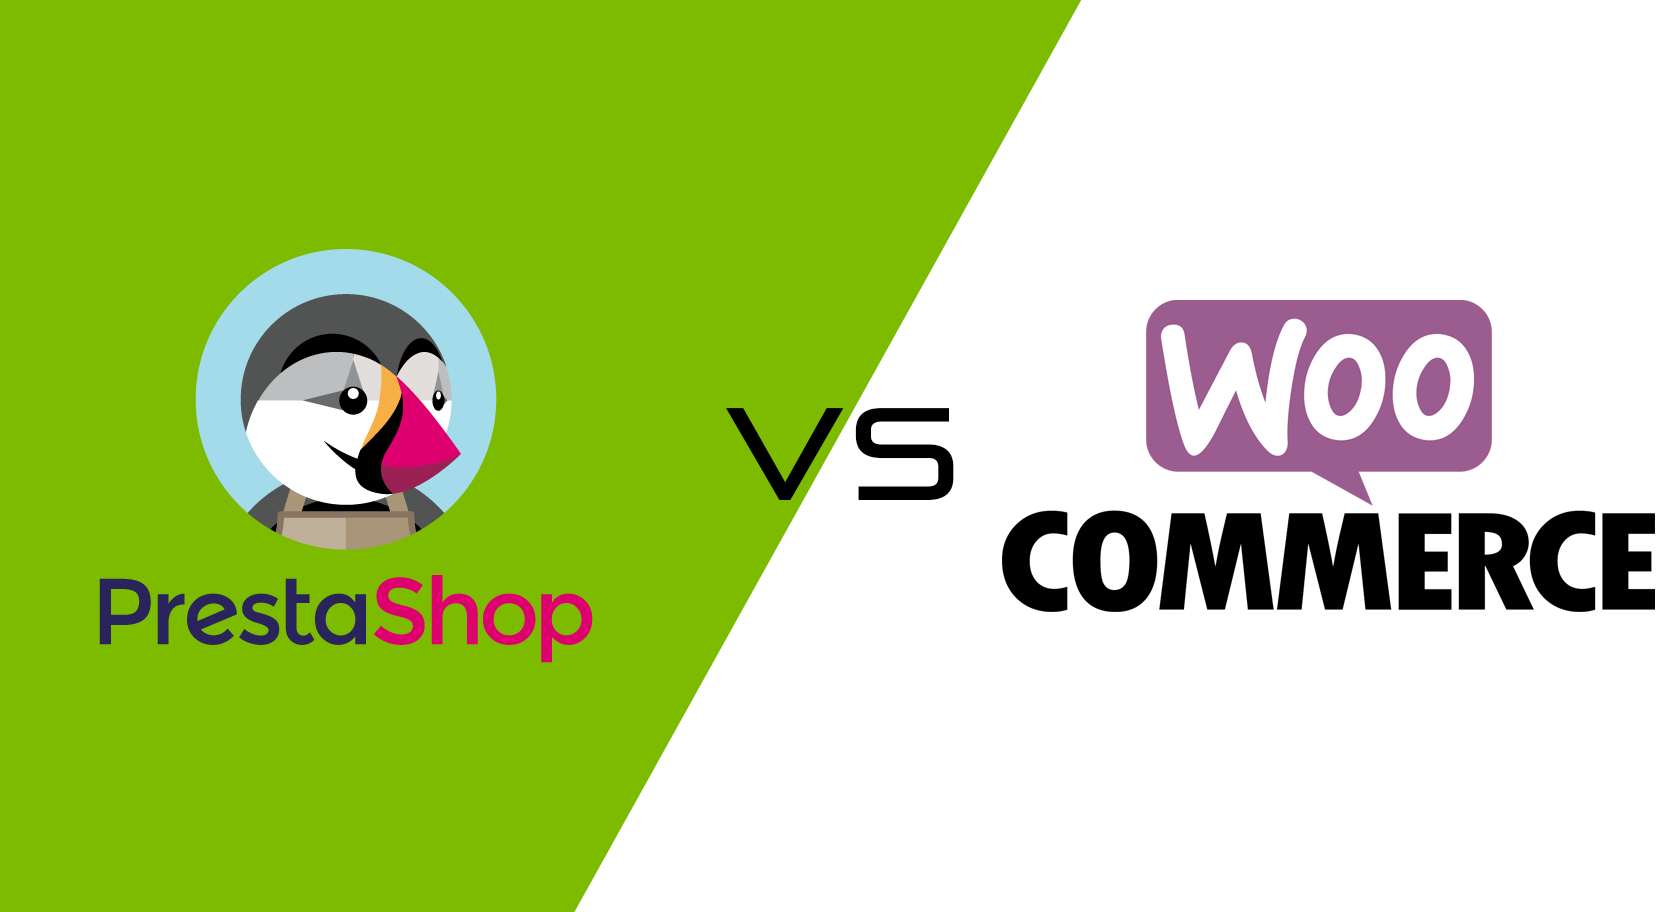 Prestashop Vs WooCommerce – Which One Suits The Best For Your Business?